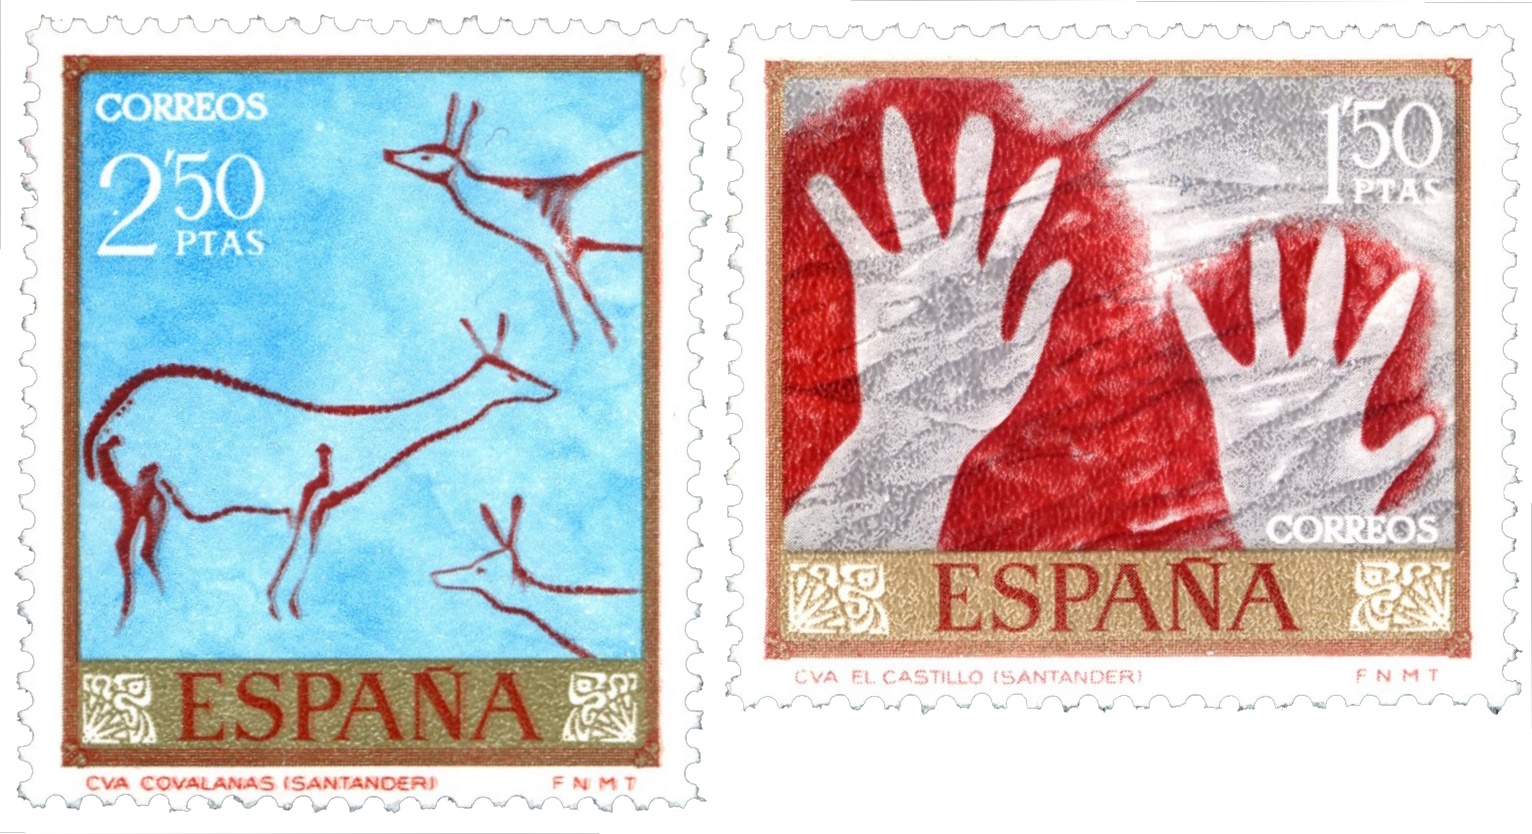 Cave paintings on stamps of Spain 1967